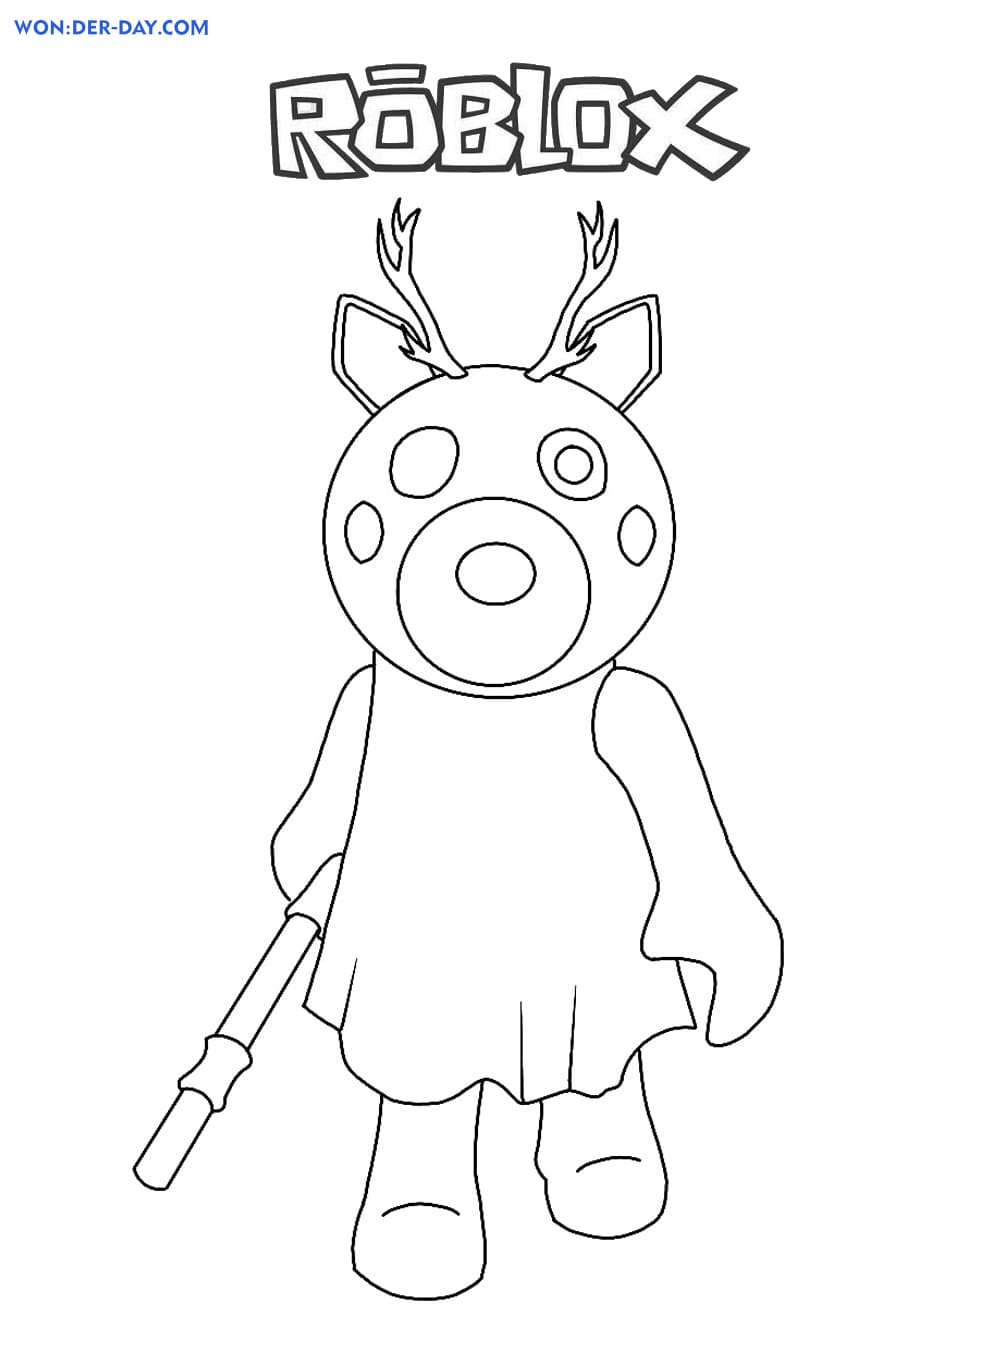 Piggy Roblox Coloring Pages Wonder Day Coloring Pages For Children And Adults - roblox piggy zizzy coloring pages